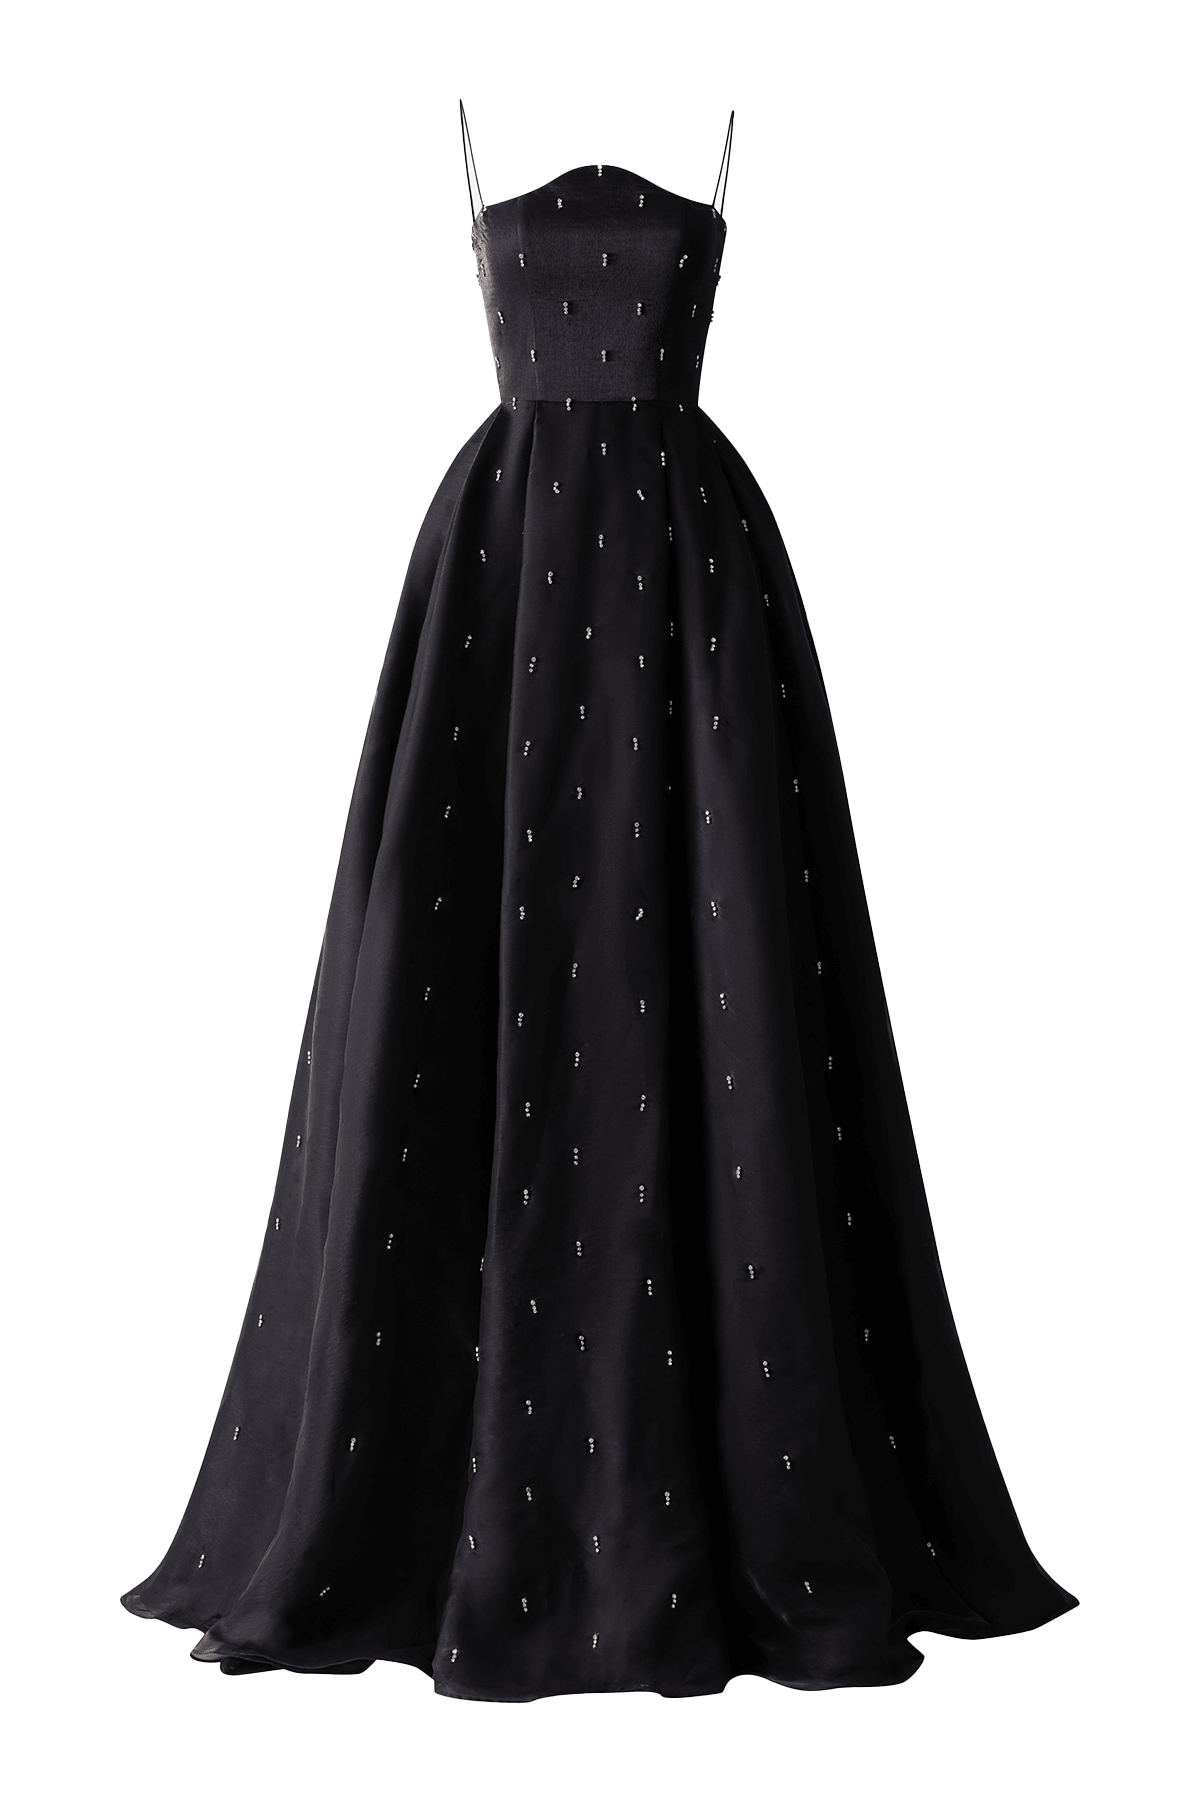 Black Satin Bridal Evening Gown With Spaghetti Straps, Lace Appliques, And  Backless Design Perfect For Prom, Quinceanera, Or Evening Events Available  In Plus Sizes From Kerr_miranda, $161.46 | DHgate.Com